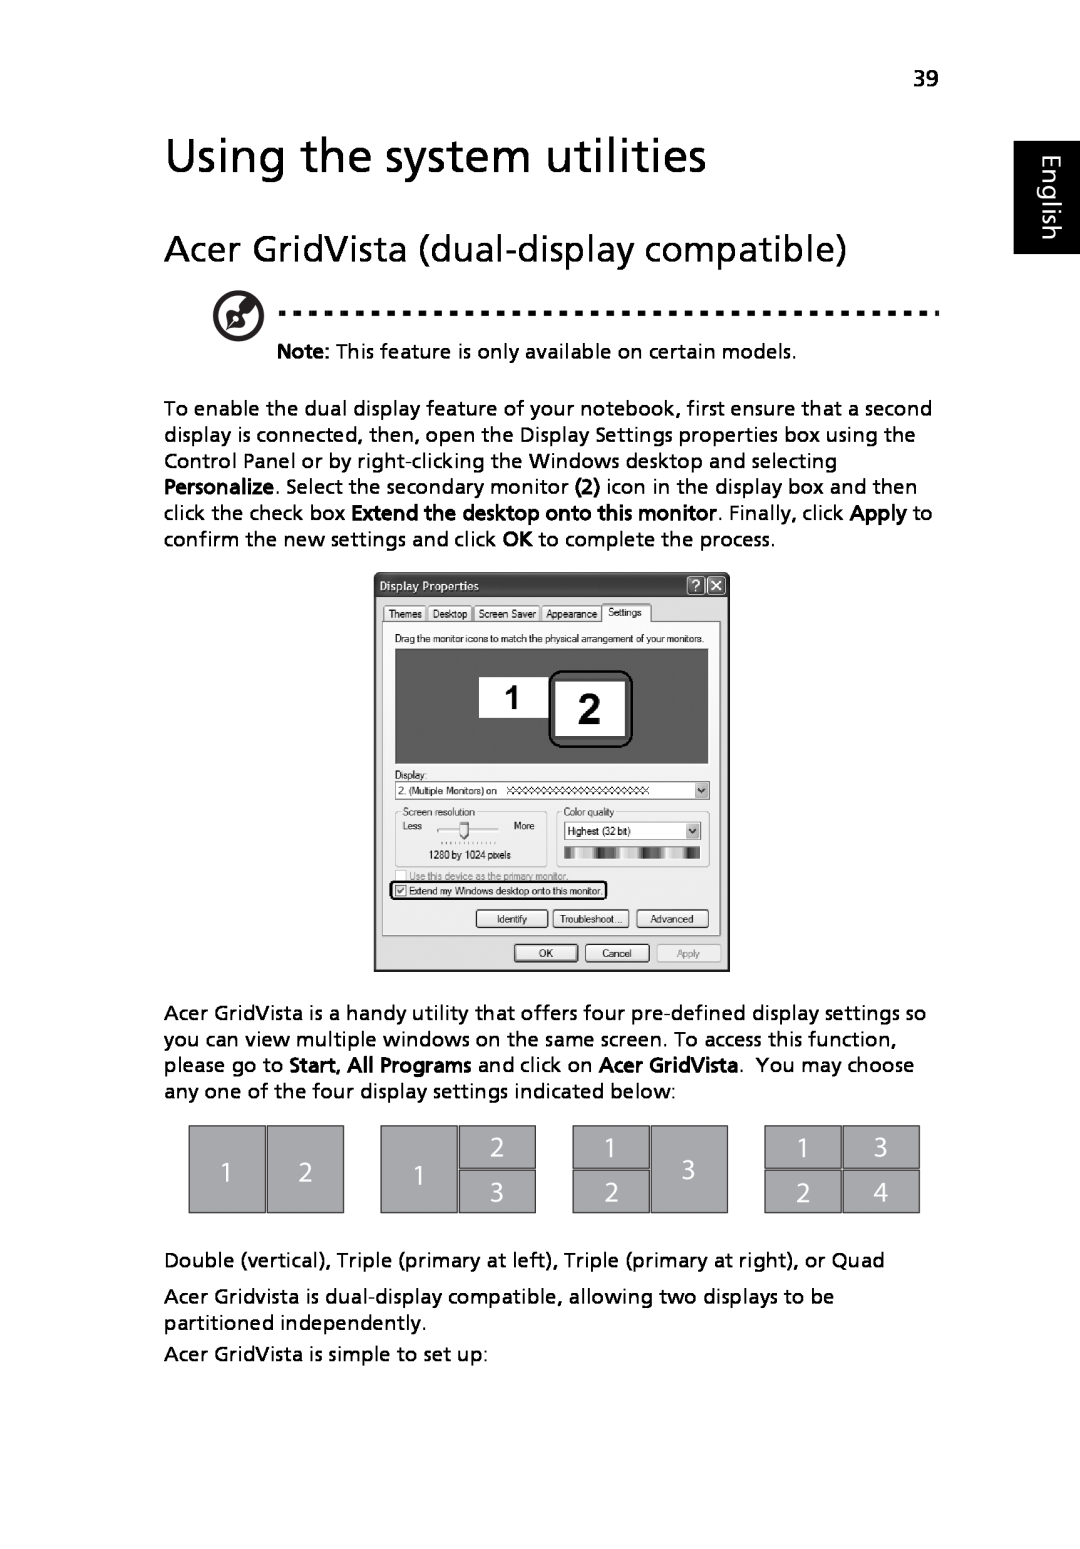 Acer 9120 manual Using the system utilities, Acer GridVista dual-display compatible, English 